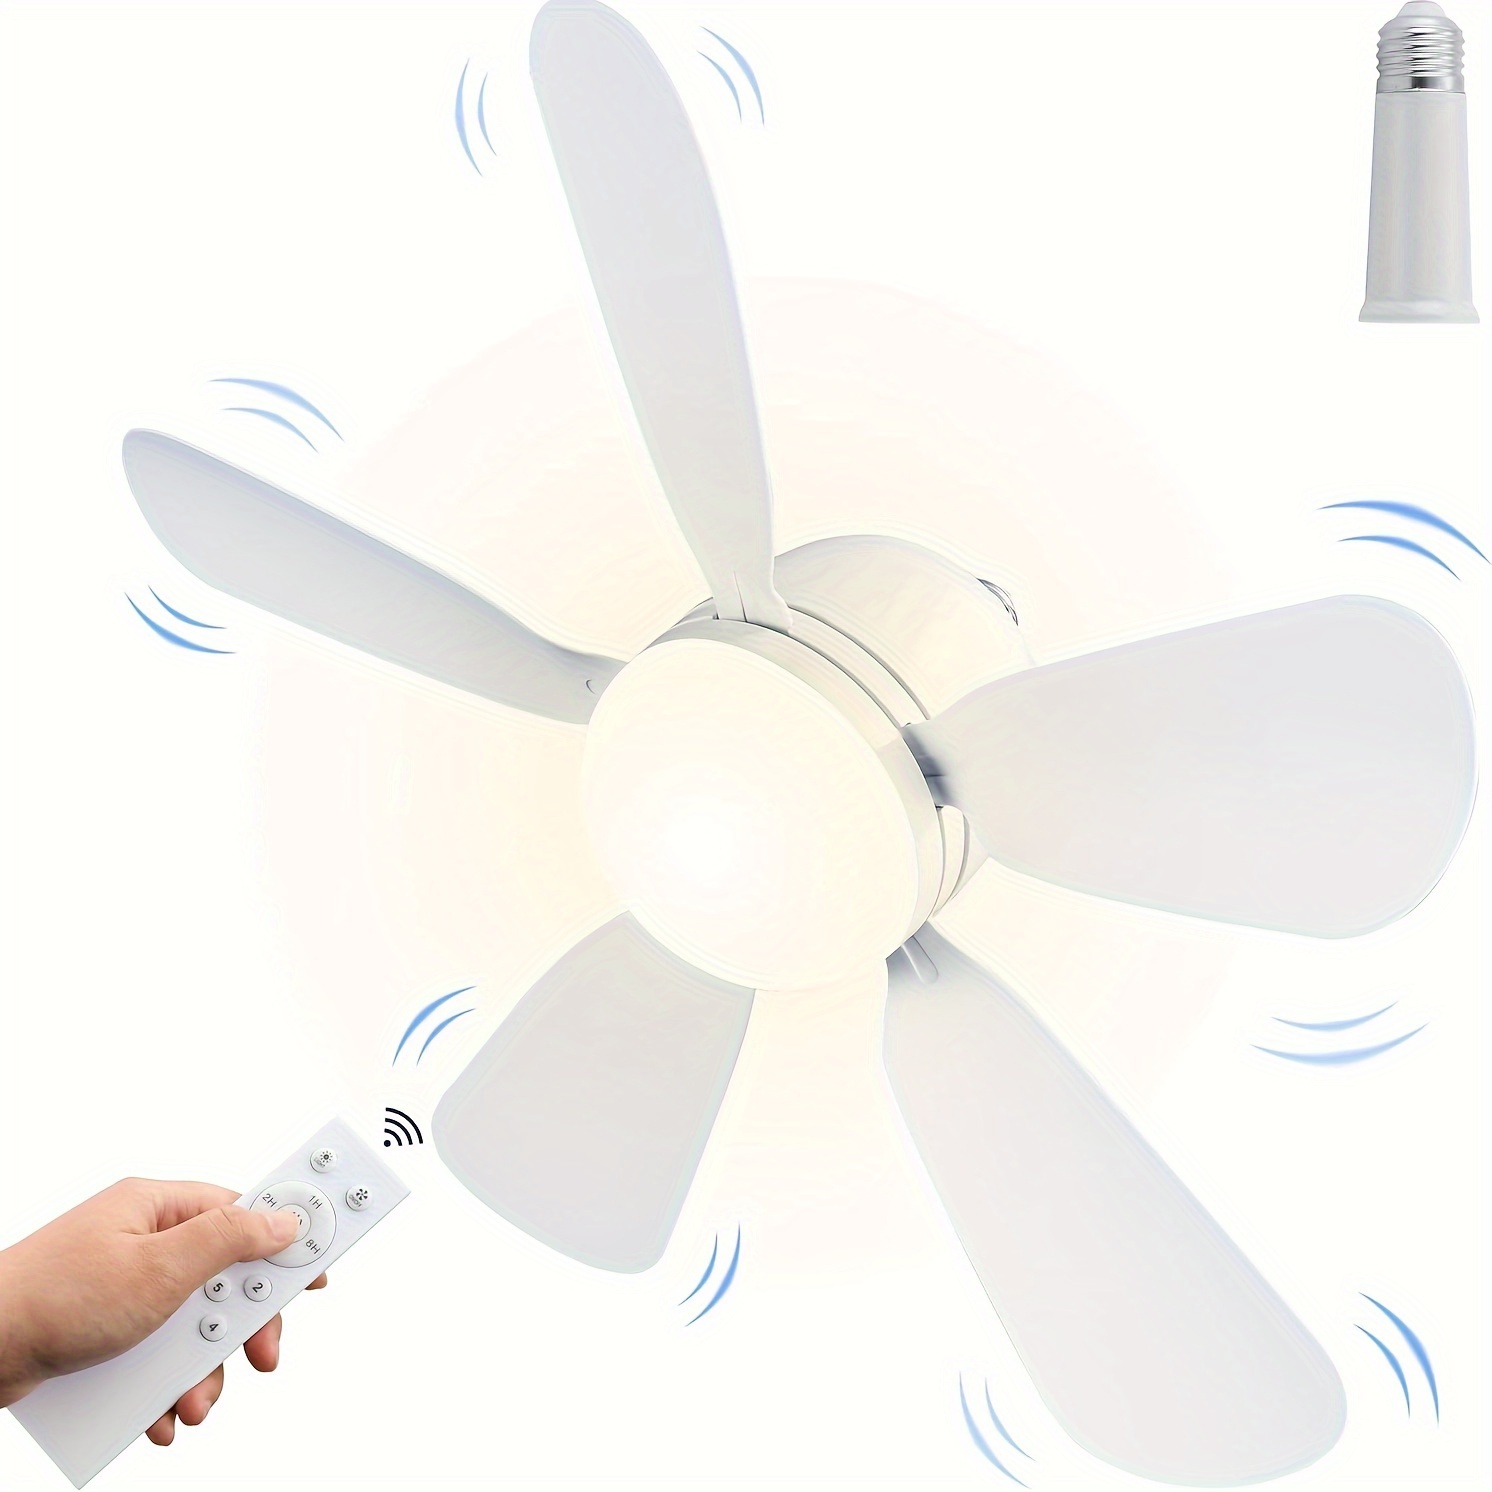 

19.68in Ceiling Fan Light With Remote, 3 Lights 5-speed Powerful Airflow Quiet Socket Fan, Fits E26 Socket, Abs Material, 85v-265v Hardwiring For Kitchen, Bedroom, Basement, Garage - White